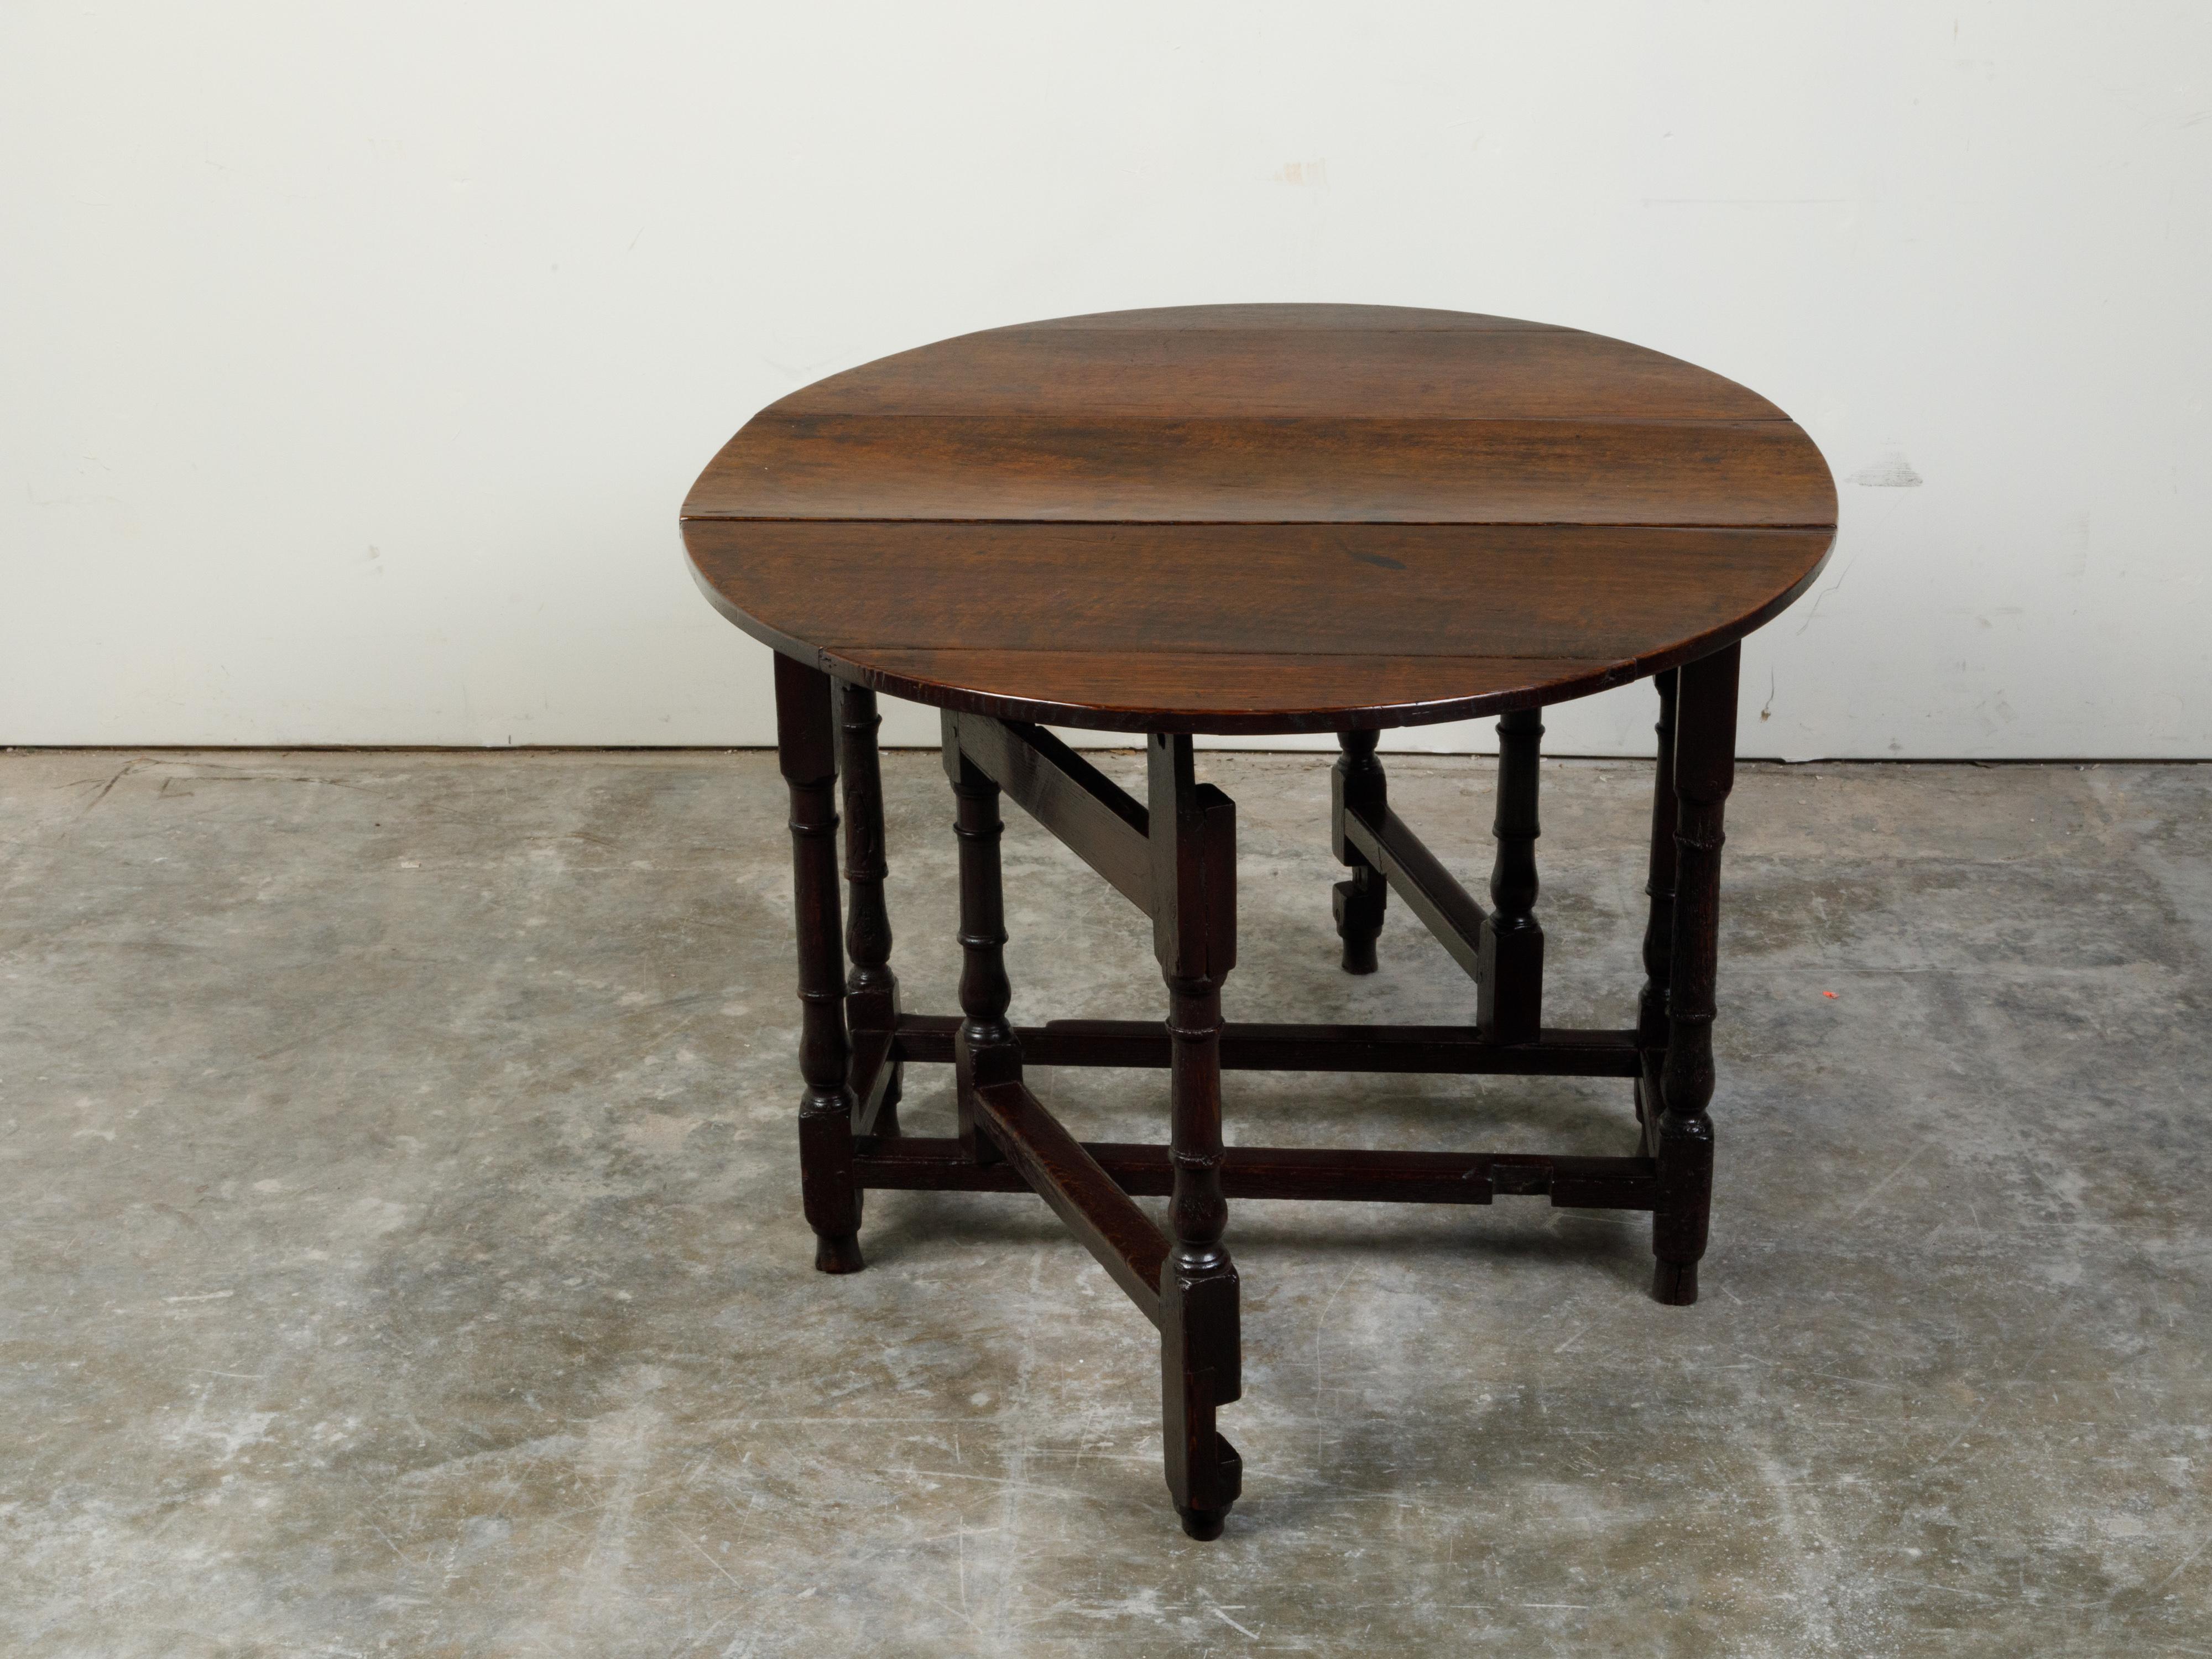 An English rustic drop-leaf gateleg table from the 18th century, with oval top and turned legs. Created in England during the 18th century, this table features an oval top made of two drop leaves, resting upon a turned gateleg base. Accented with a